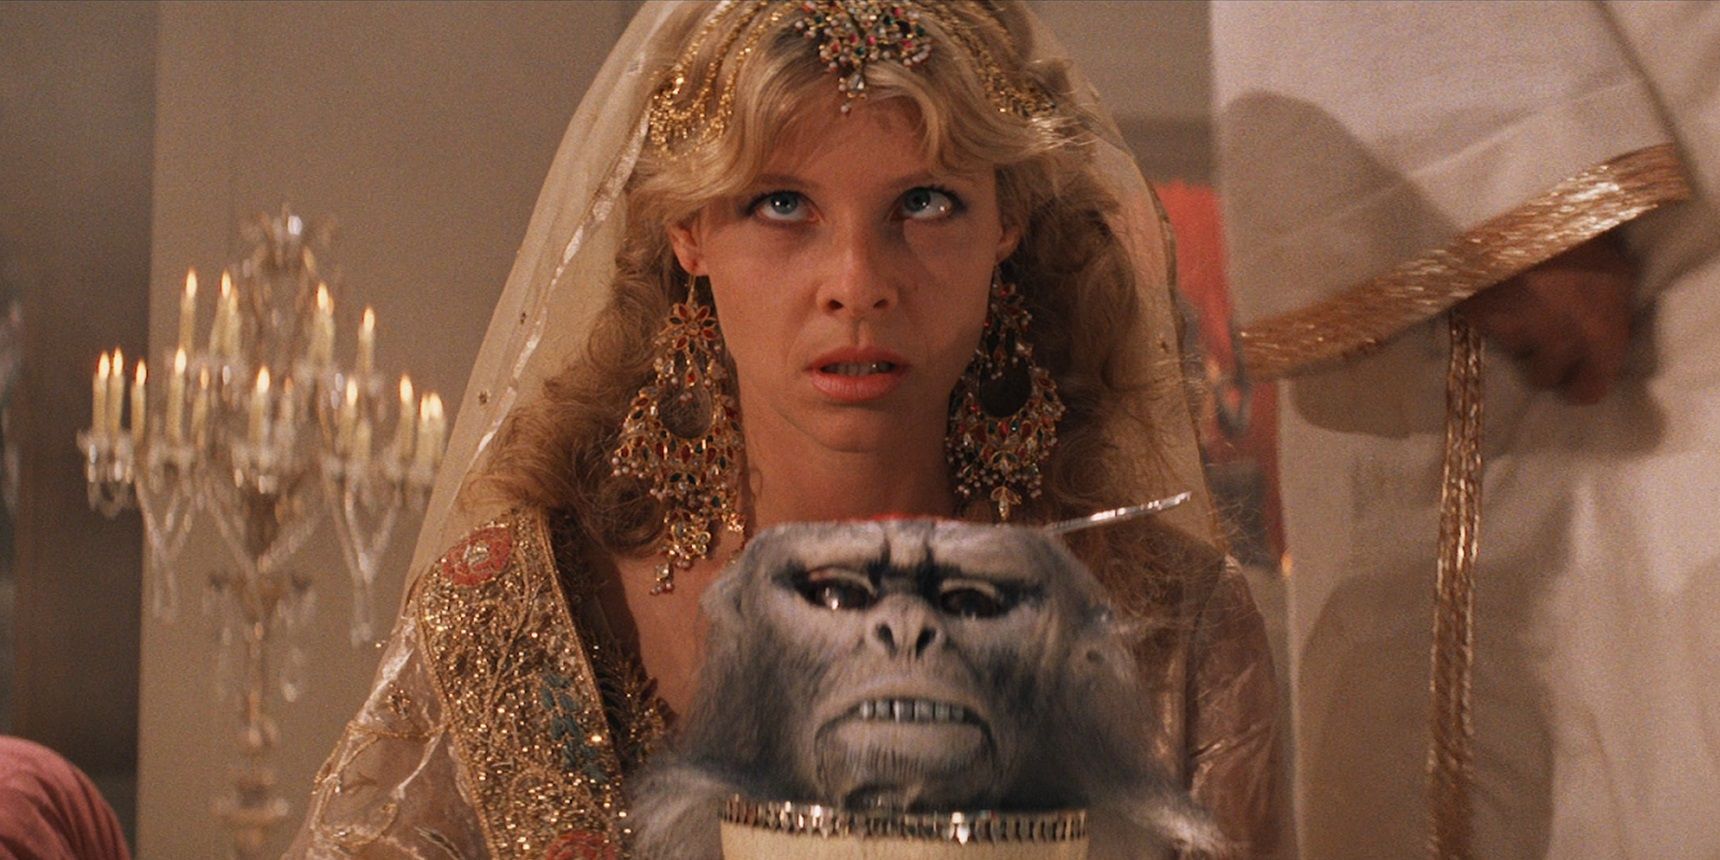 Willie is served monkey brains in Indiana Jones and the Temple of Doom